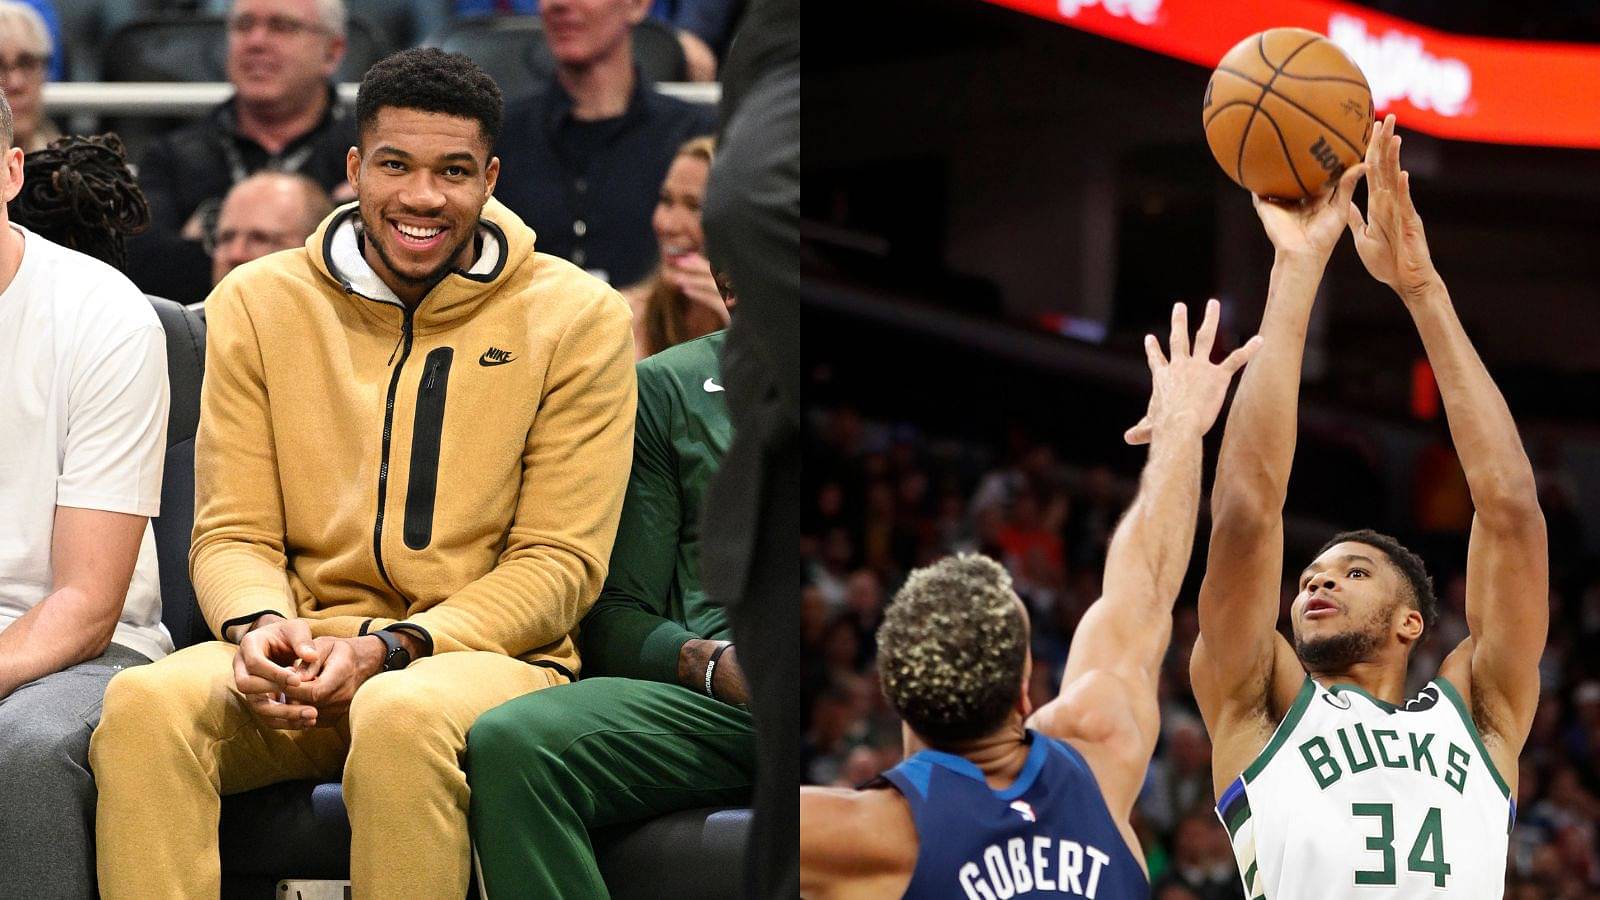 "God Said, 'You Cannot Make Threes'": Giannis Antetokounmpo has Perfect Explanation for His 3-point Shooting Woes